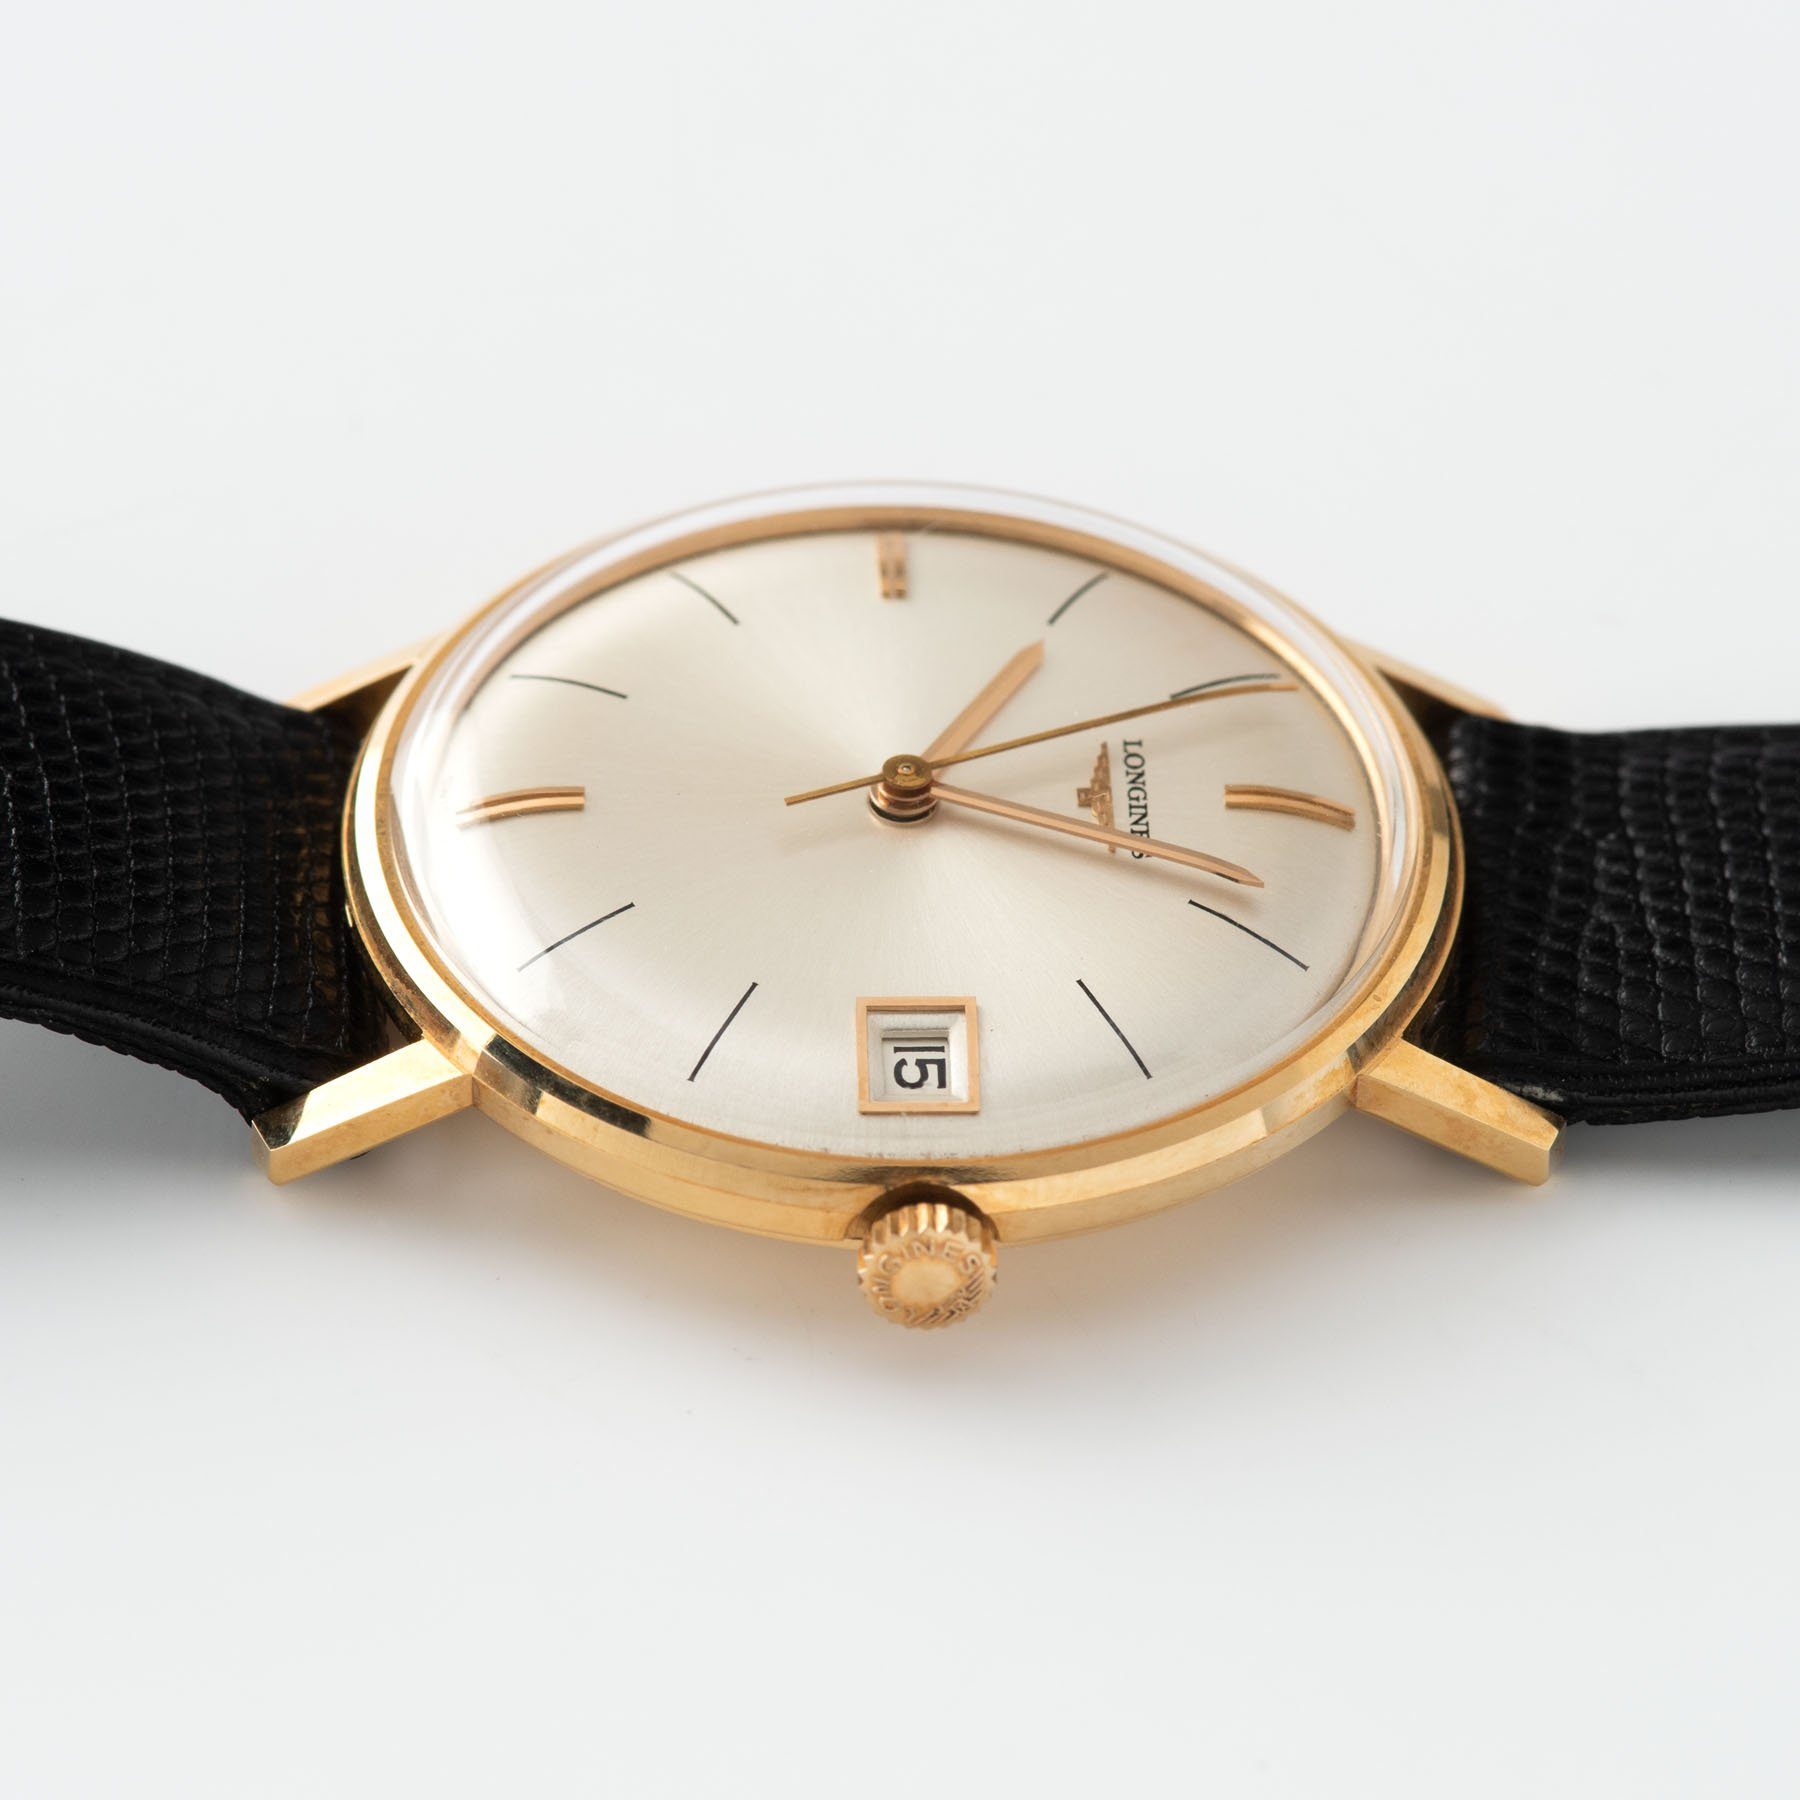 longines gold watches